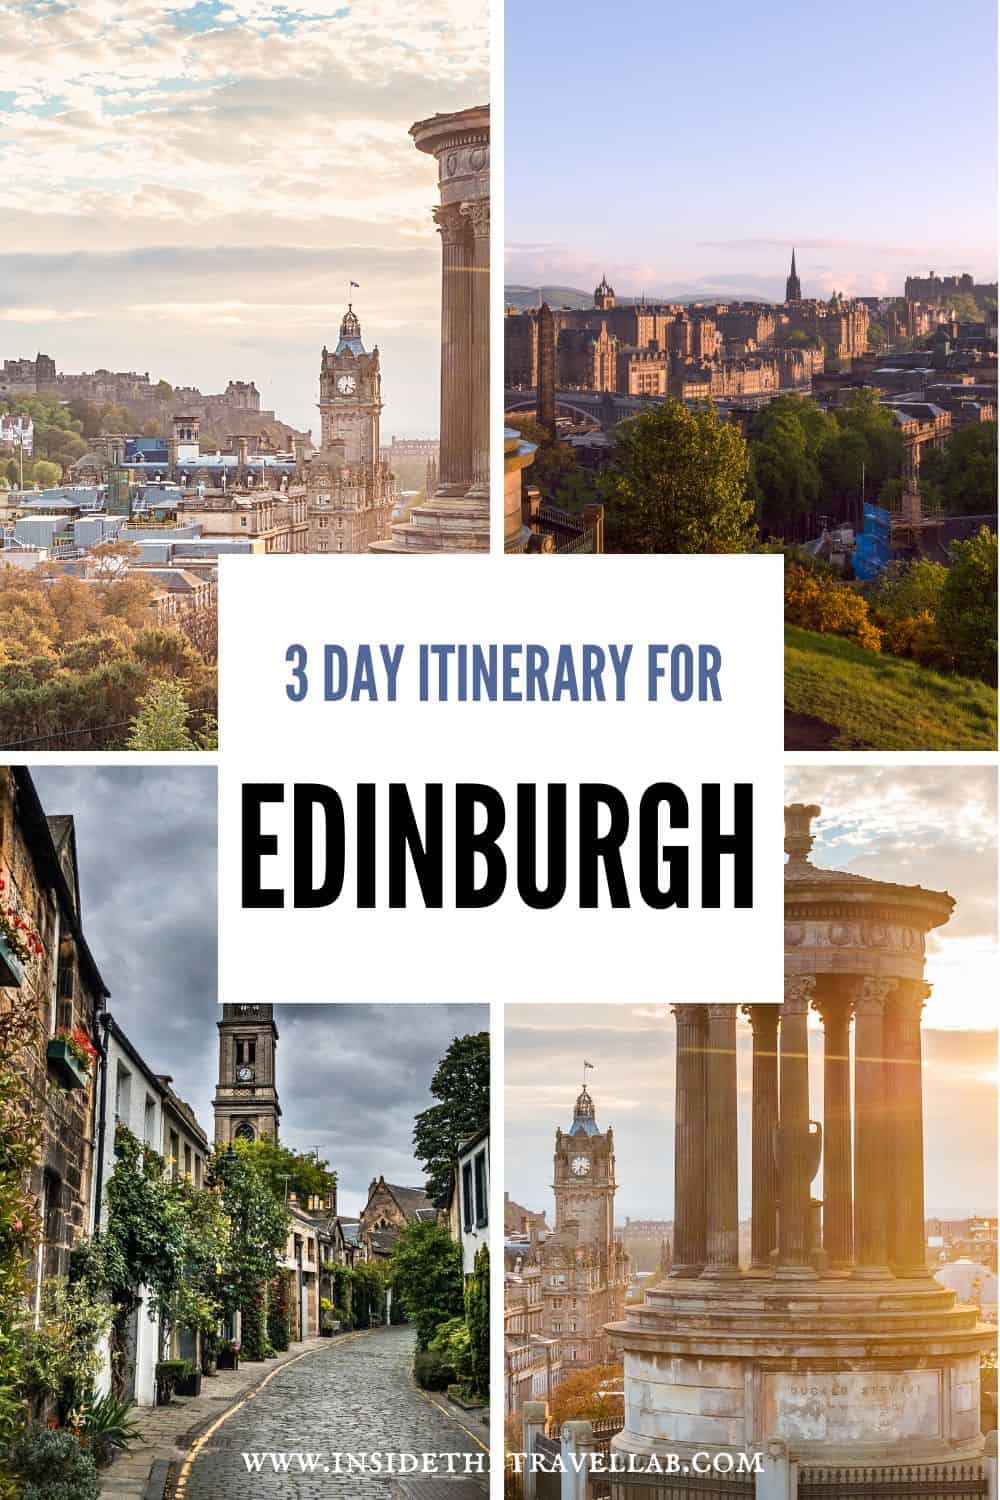 3 days in Edinburgh itinerary cover image